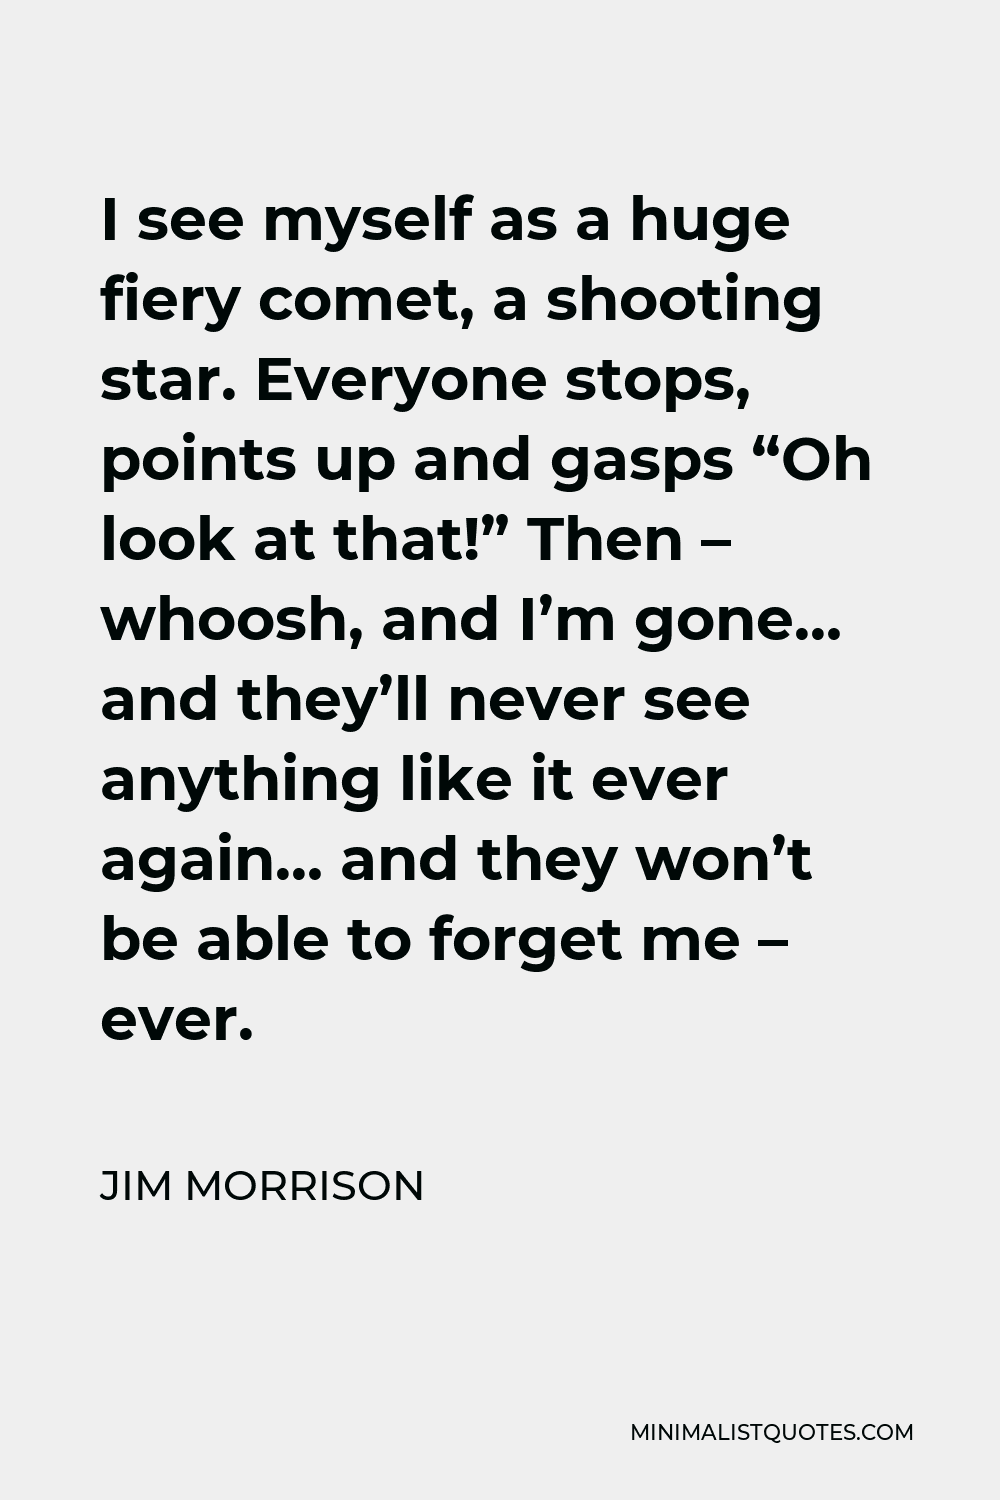 Jim Morrison Quote - I see myself as a huge fiery comet, a shooting star. Everyone stops, points up and gasps “Oh look at that!” Then – whoosh, and I’m gone… and they’ll never see anything like it ever again… and they won’t be able to forget me – ever.